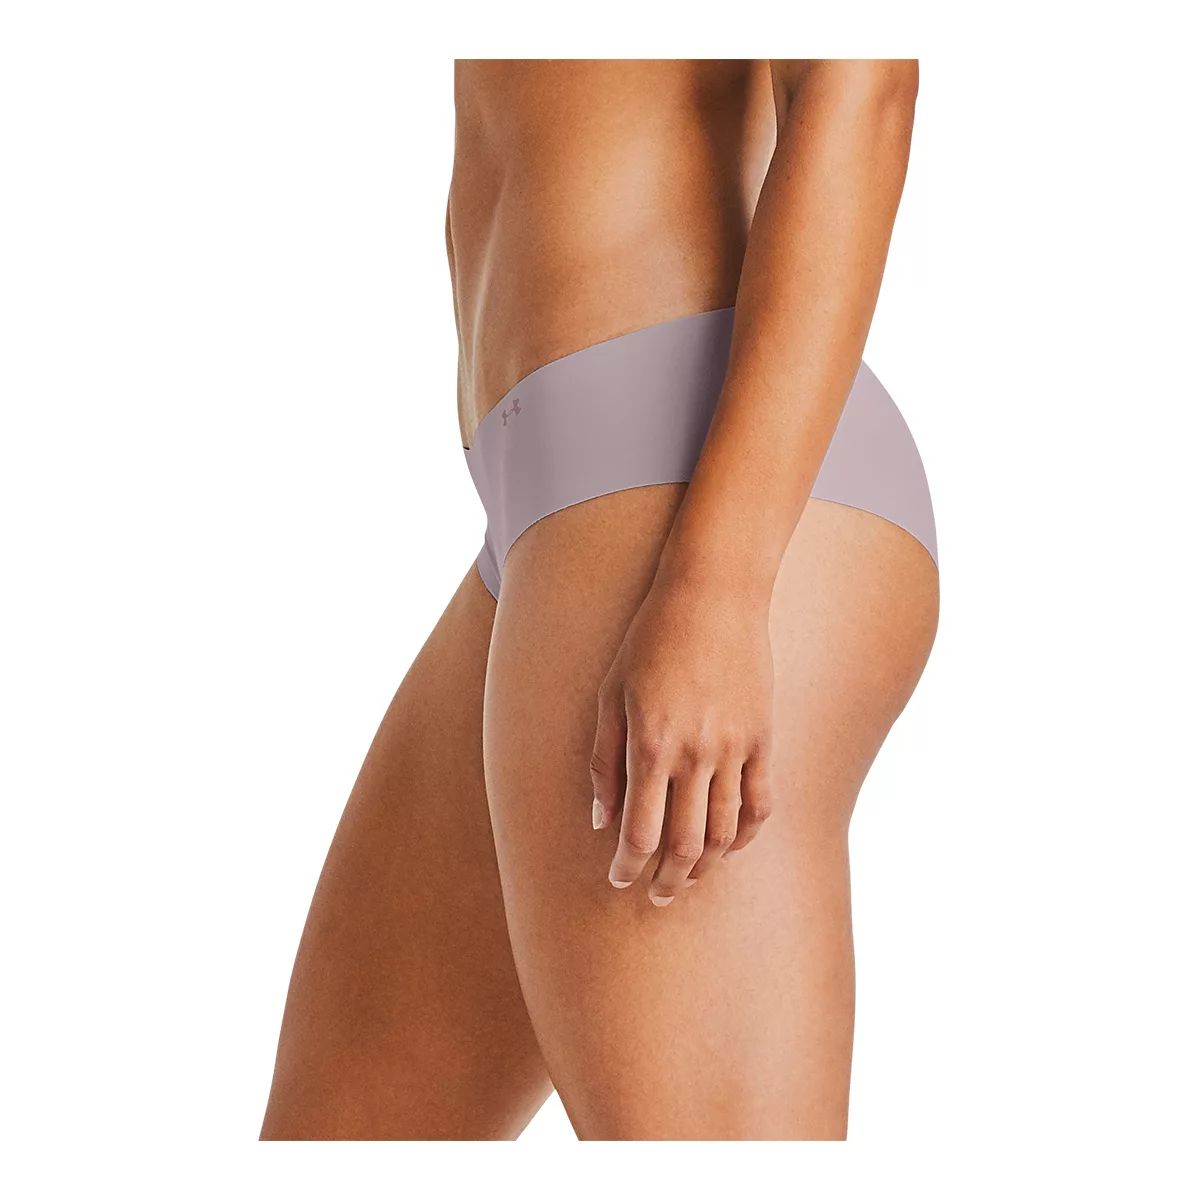 UNDER ARMOUR Women's Pure Stretch Sheer Cheeky Underwear - Bob's Stores